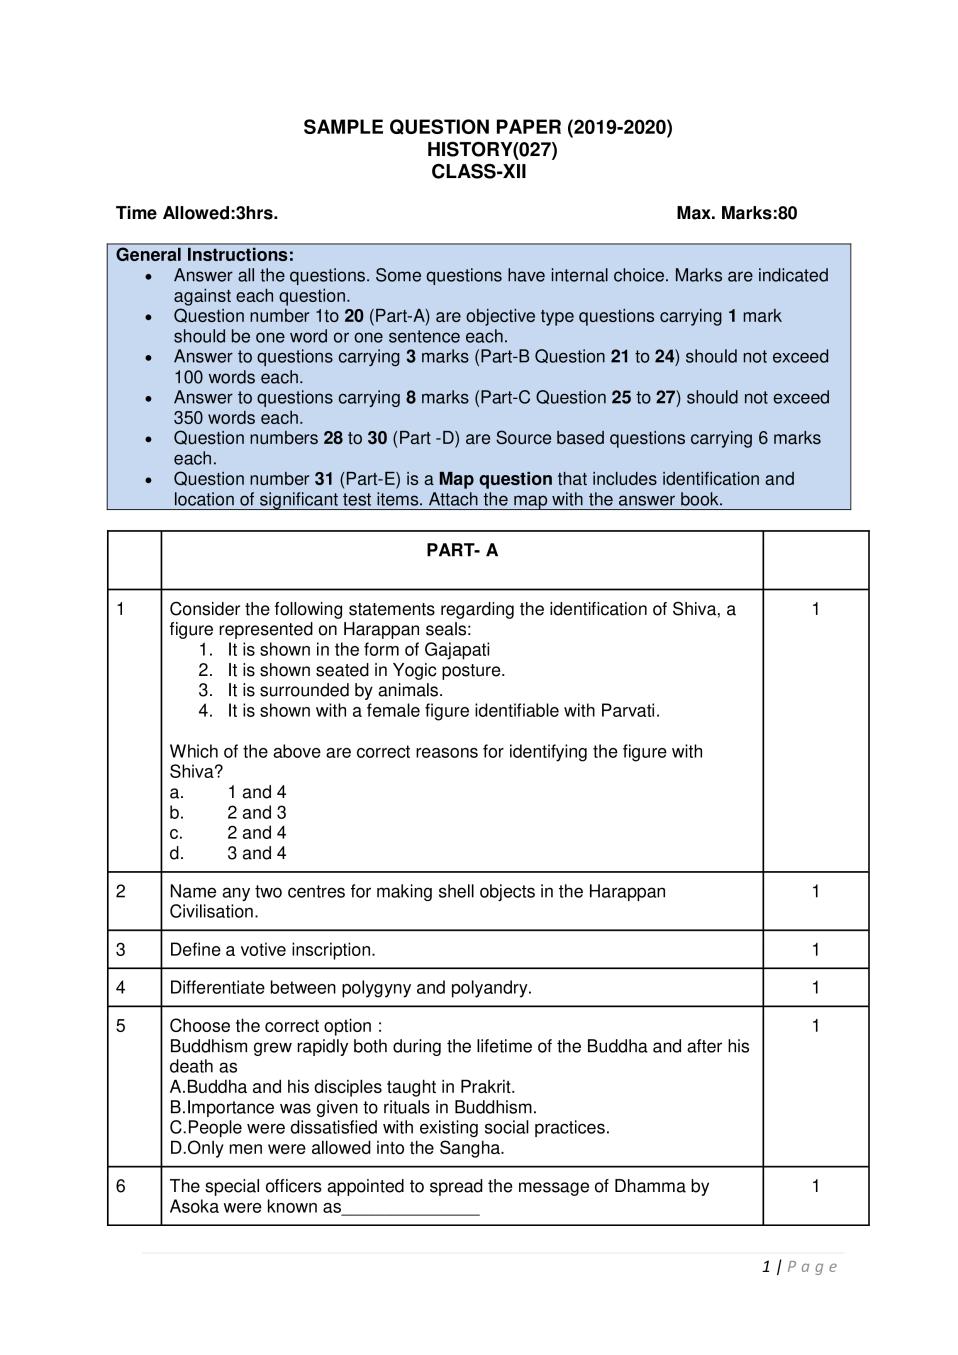 CBSE Class 12 Sample Paper 2020 for History - Page 1